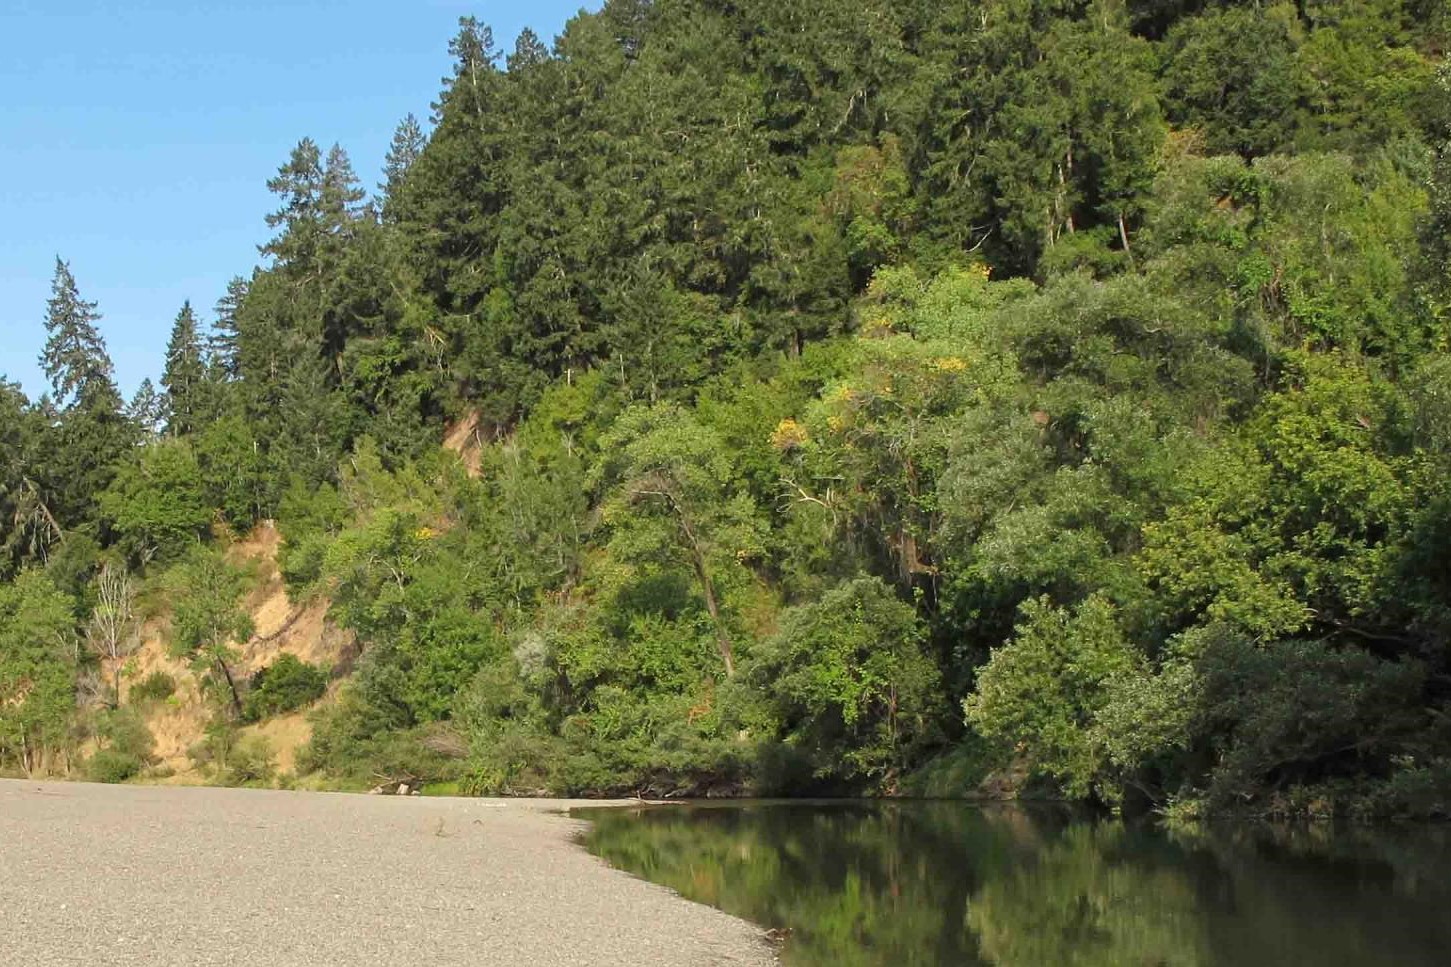 Mom's Beach at the Russian River. Sand bed on one side and lush foliage and redwoods on the other.